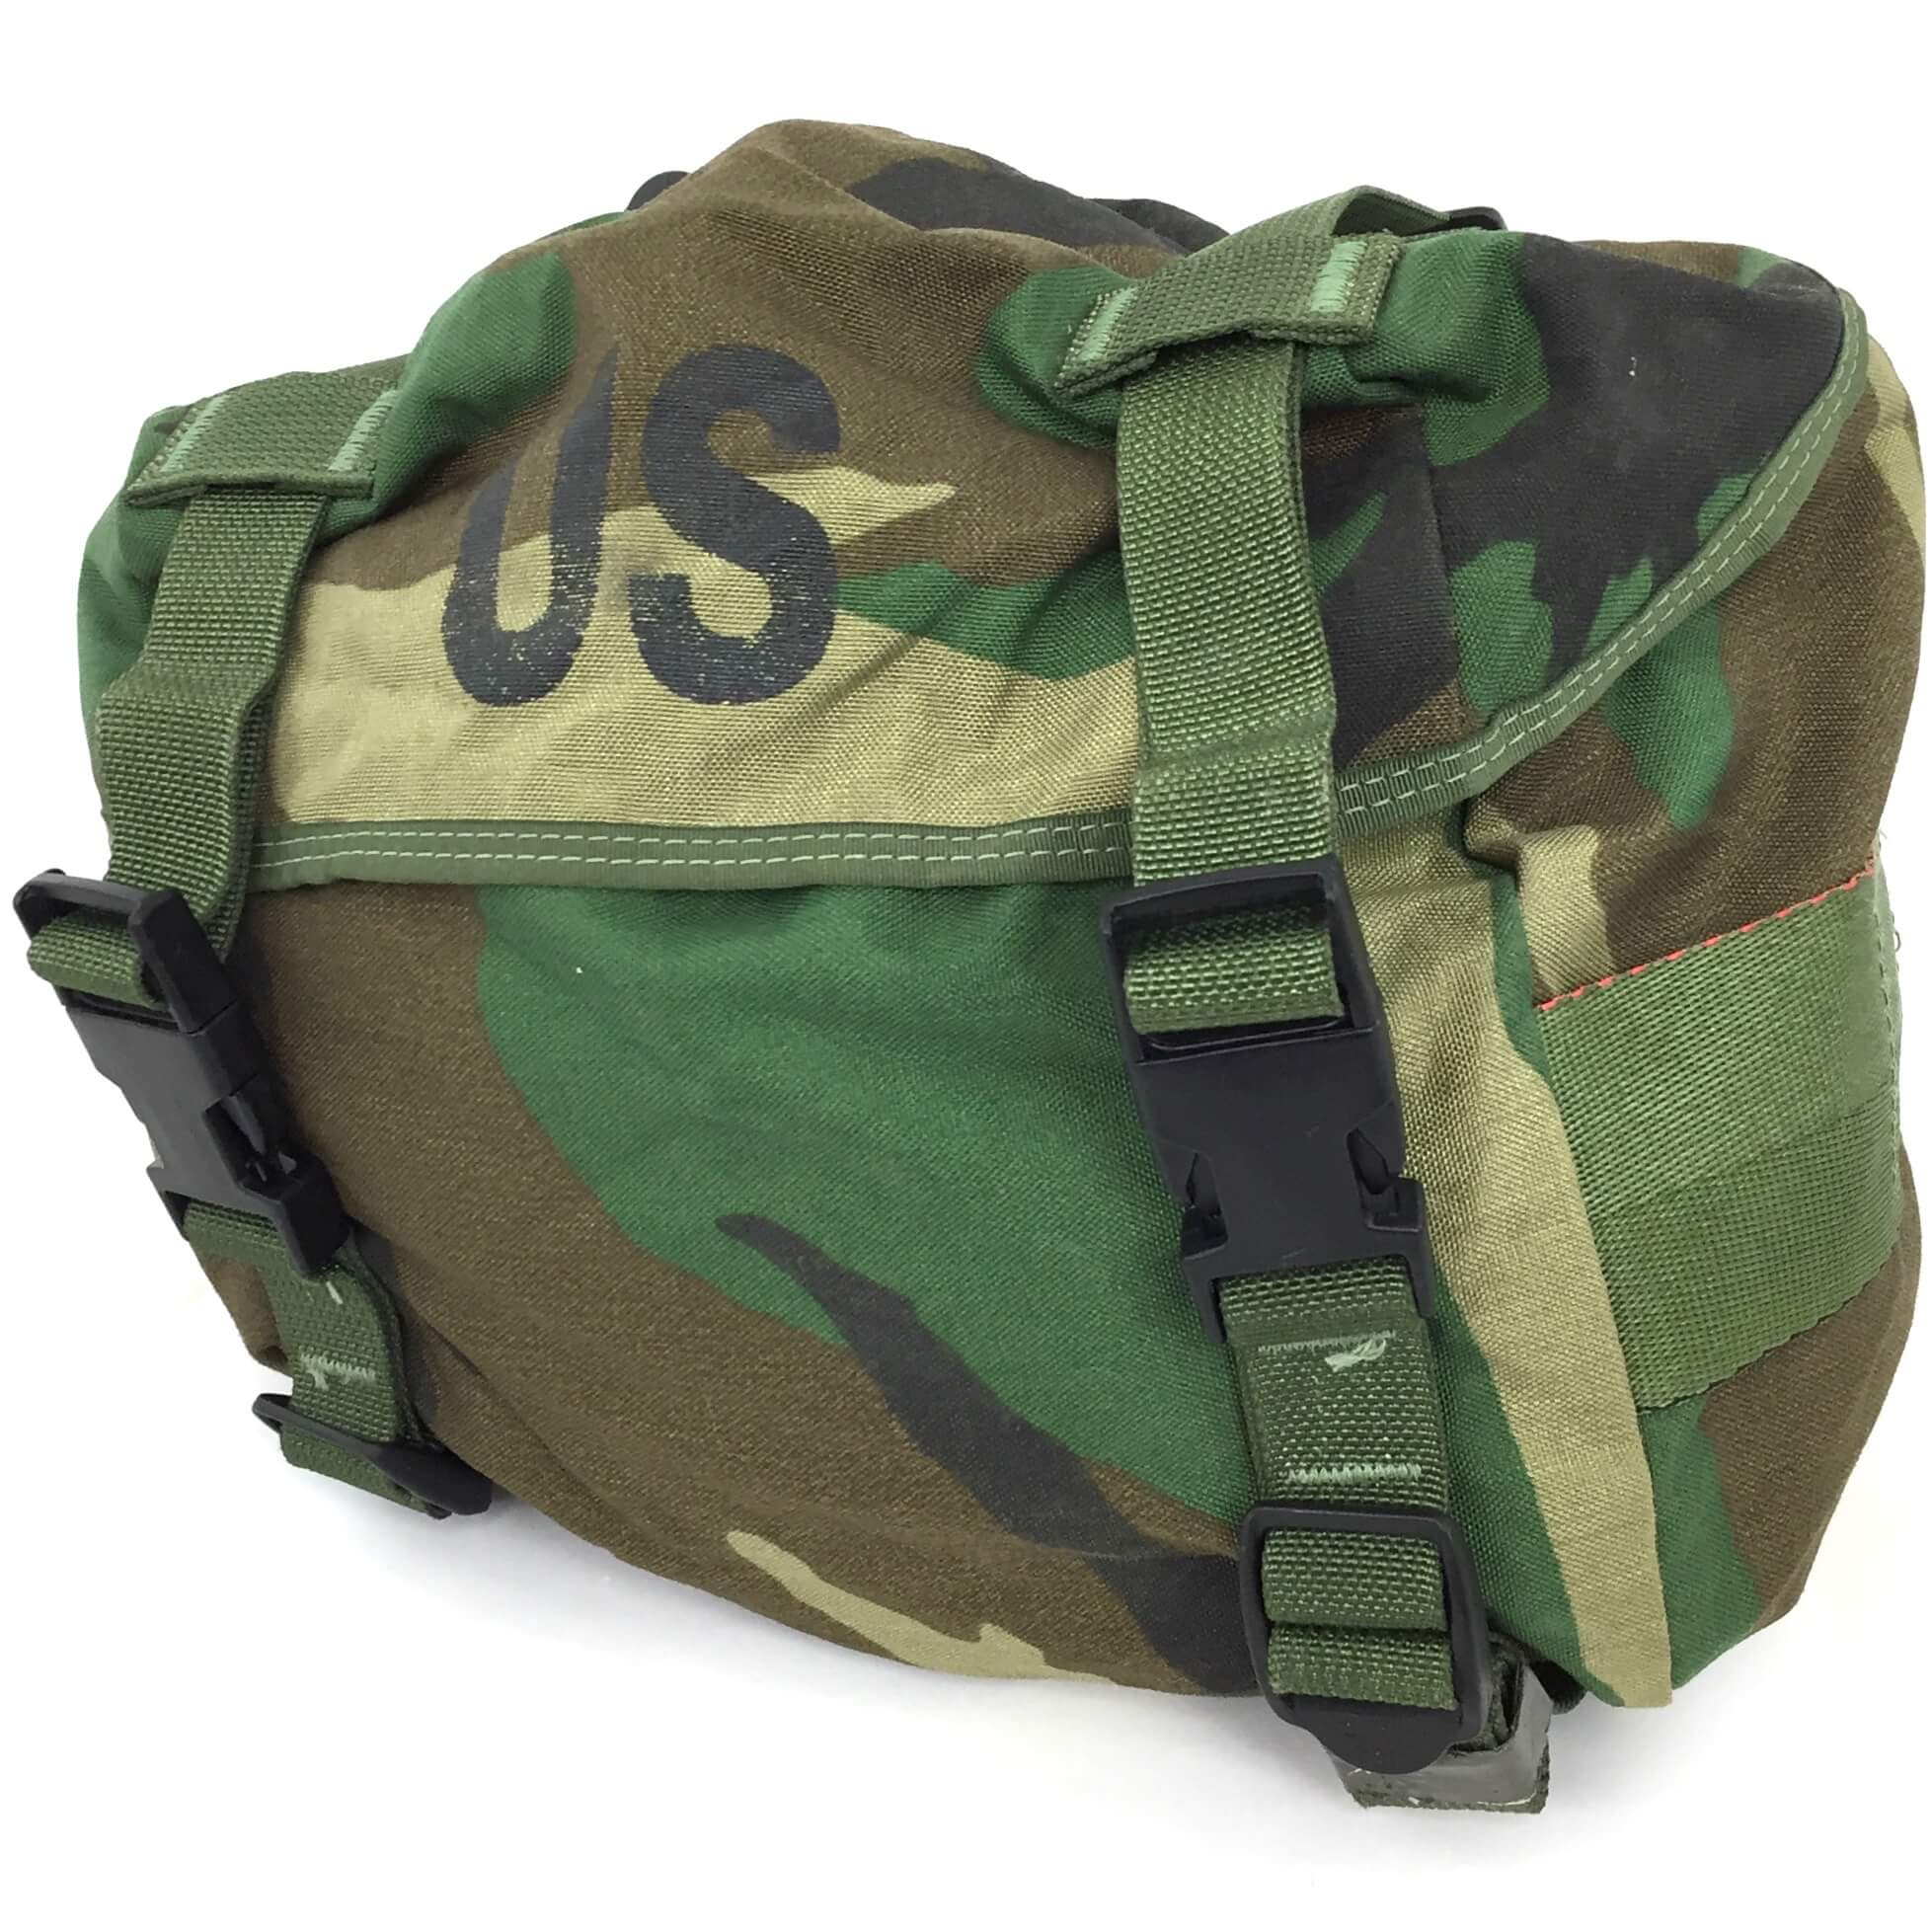 Confidencial pétalo dividendo Used BDU Field Training Pack for Sale - $18.99 & Free Shipping